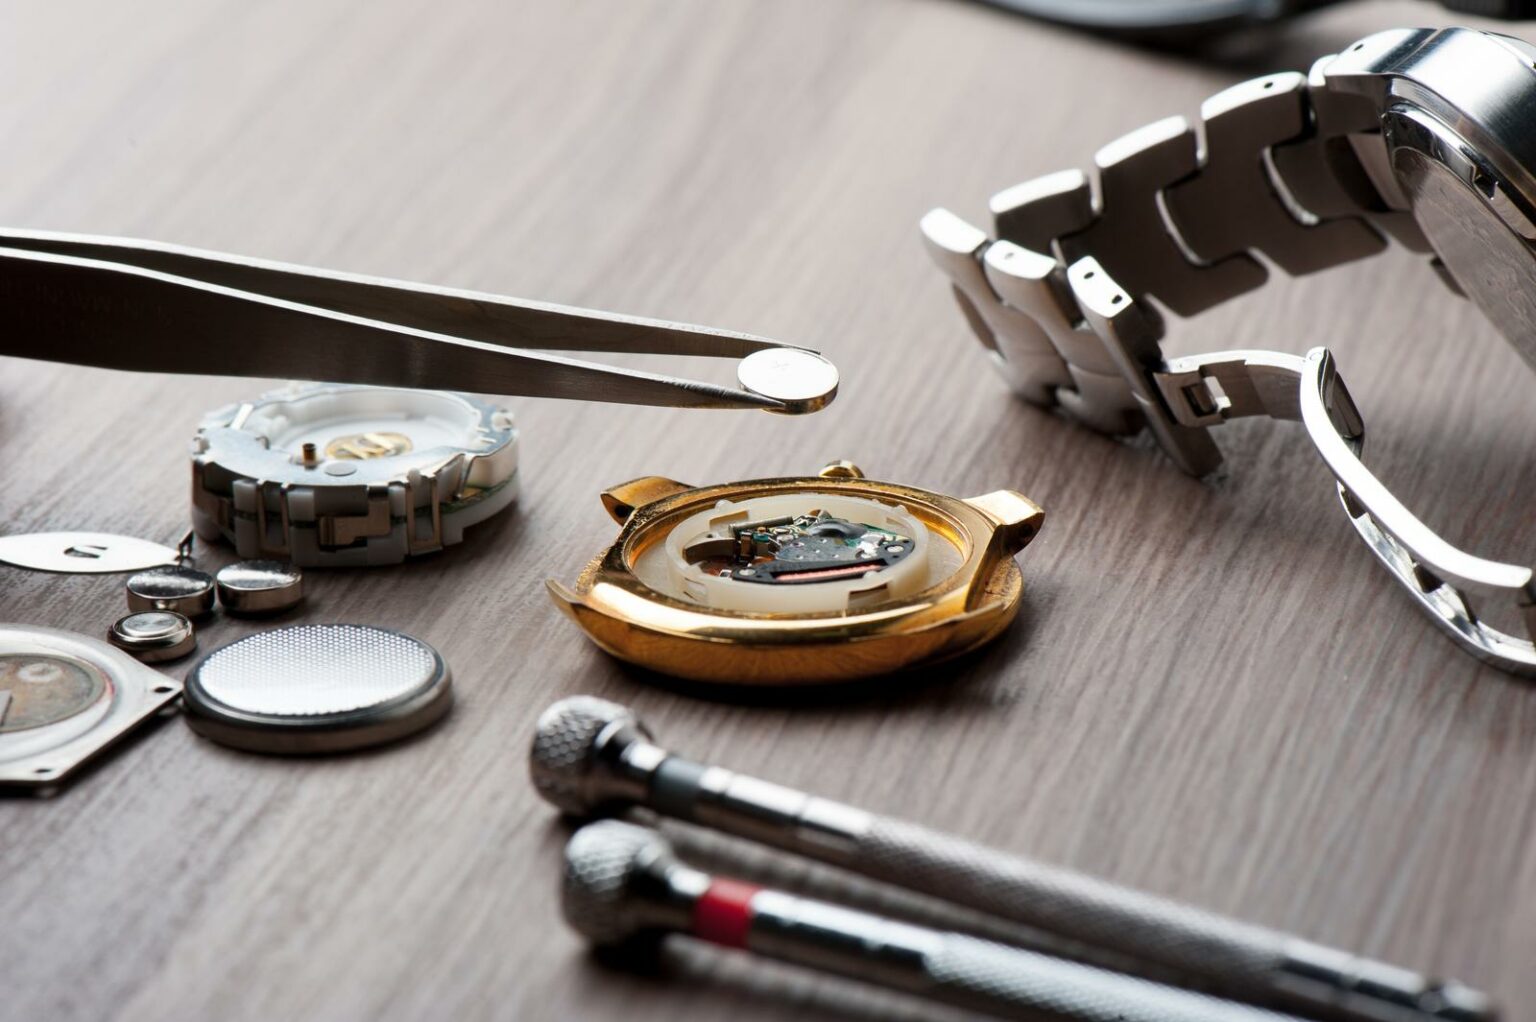 How To Change A Fossil Watch Battery